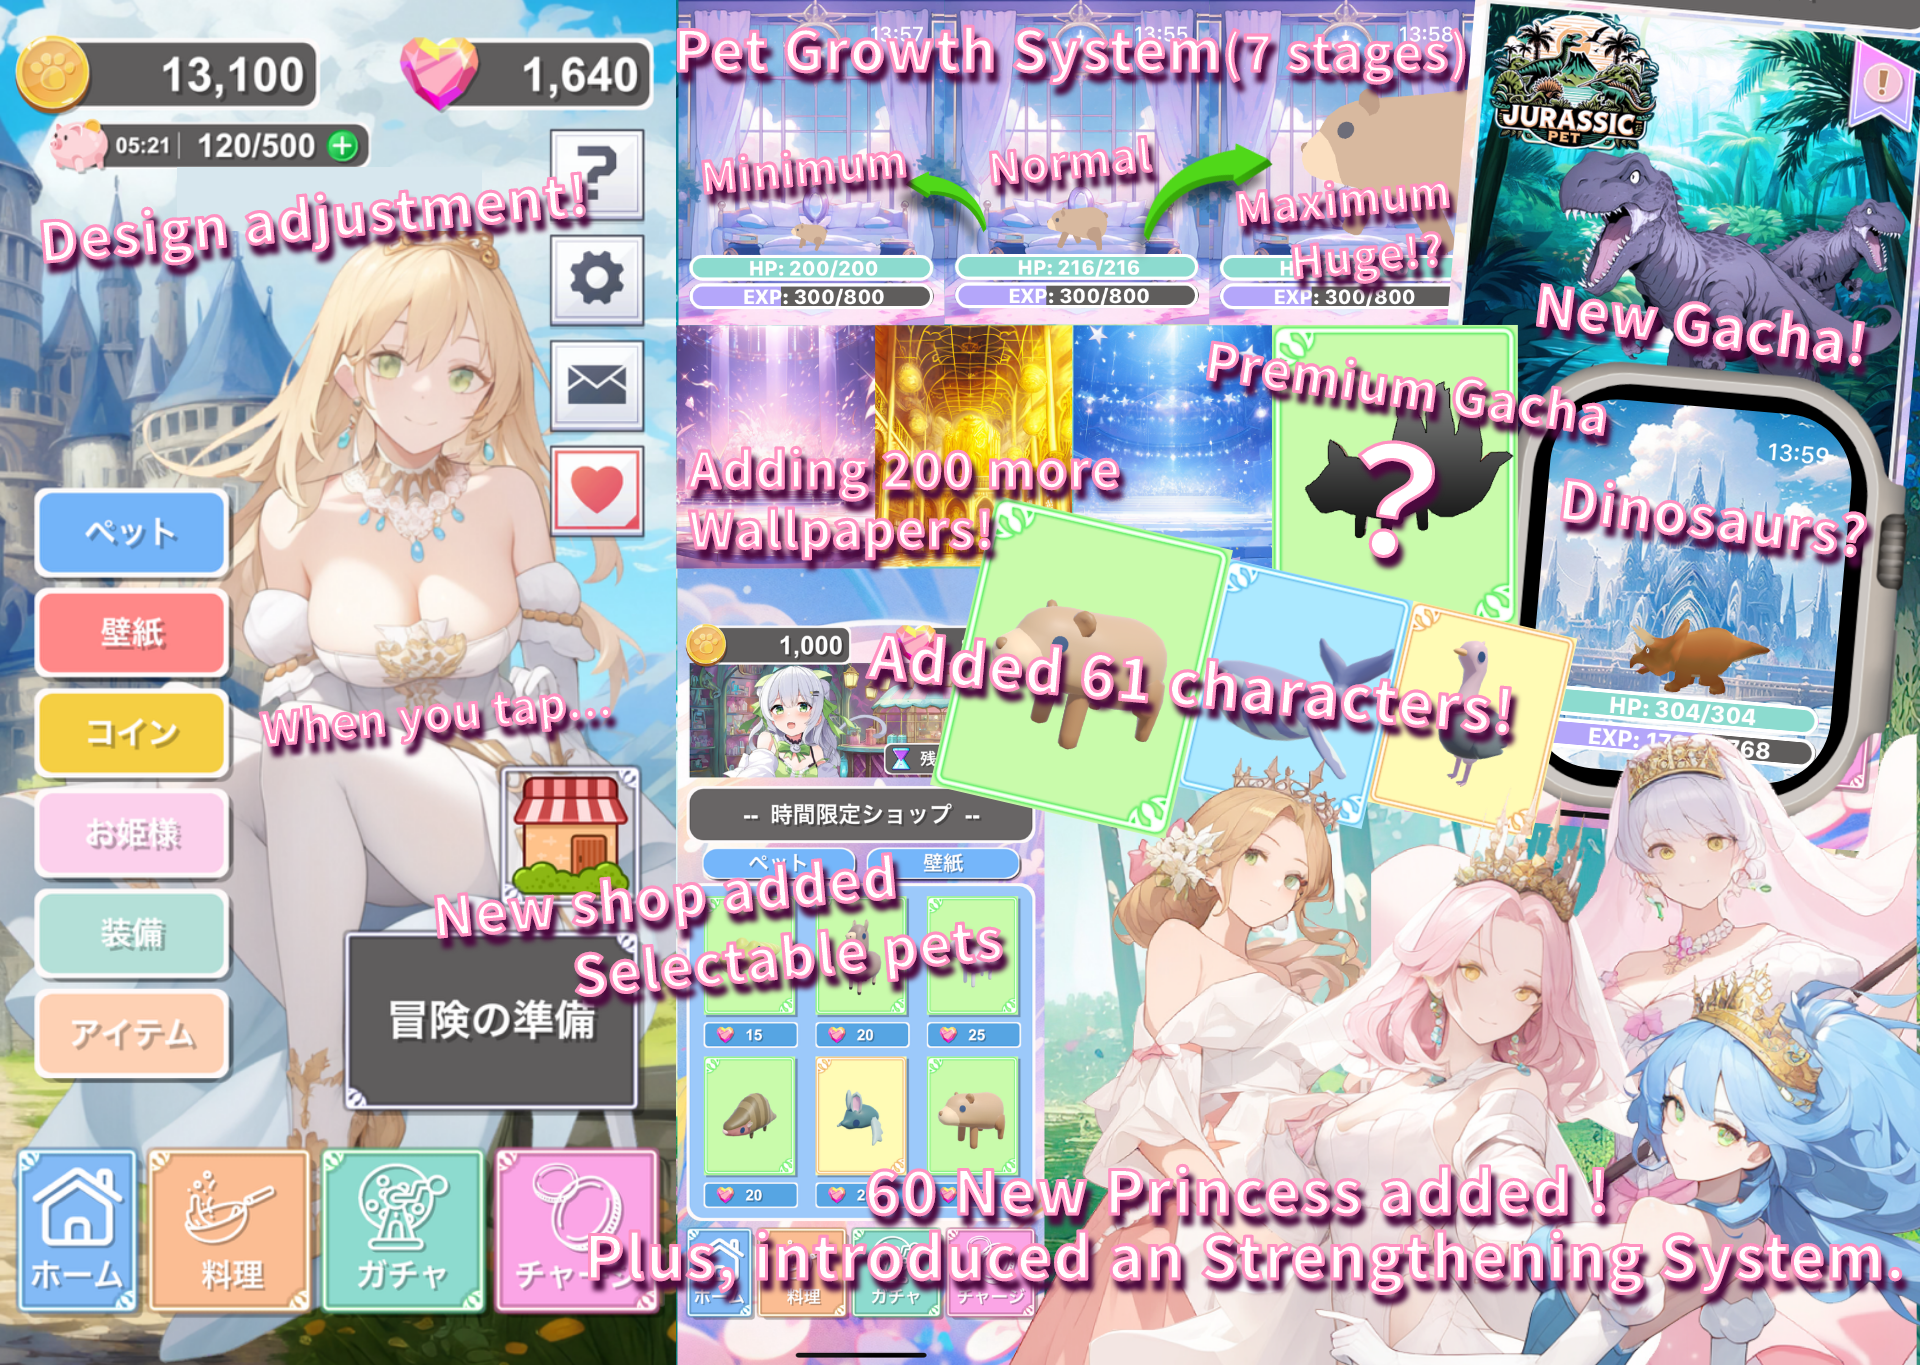 Multiple New Features New pets princesses shop gachas and systems